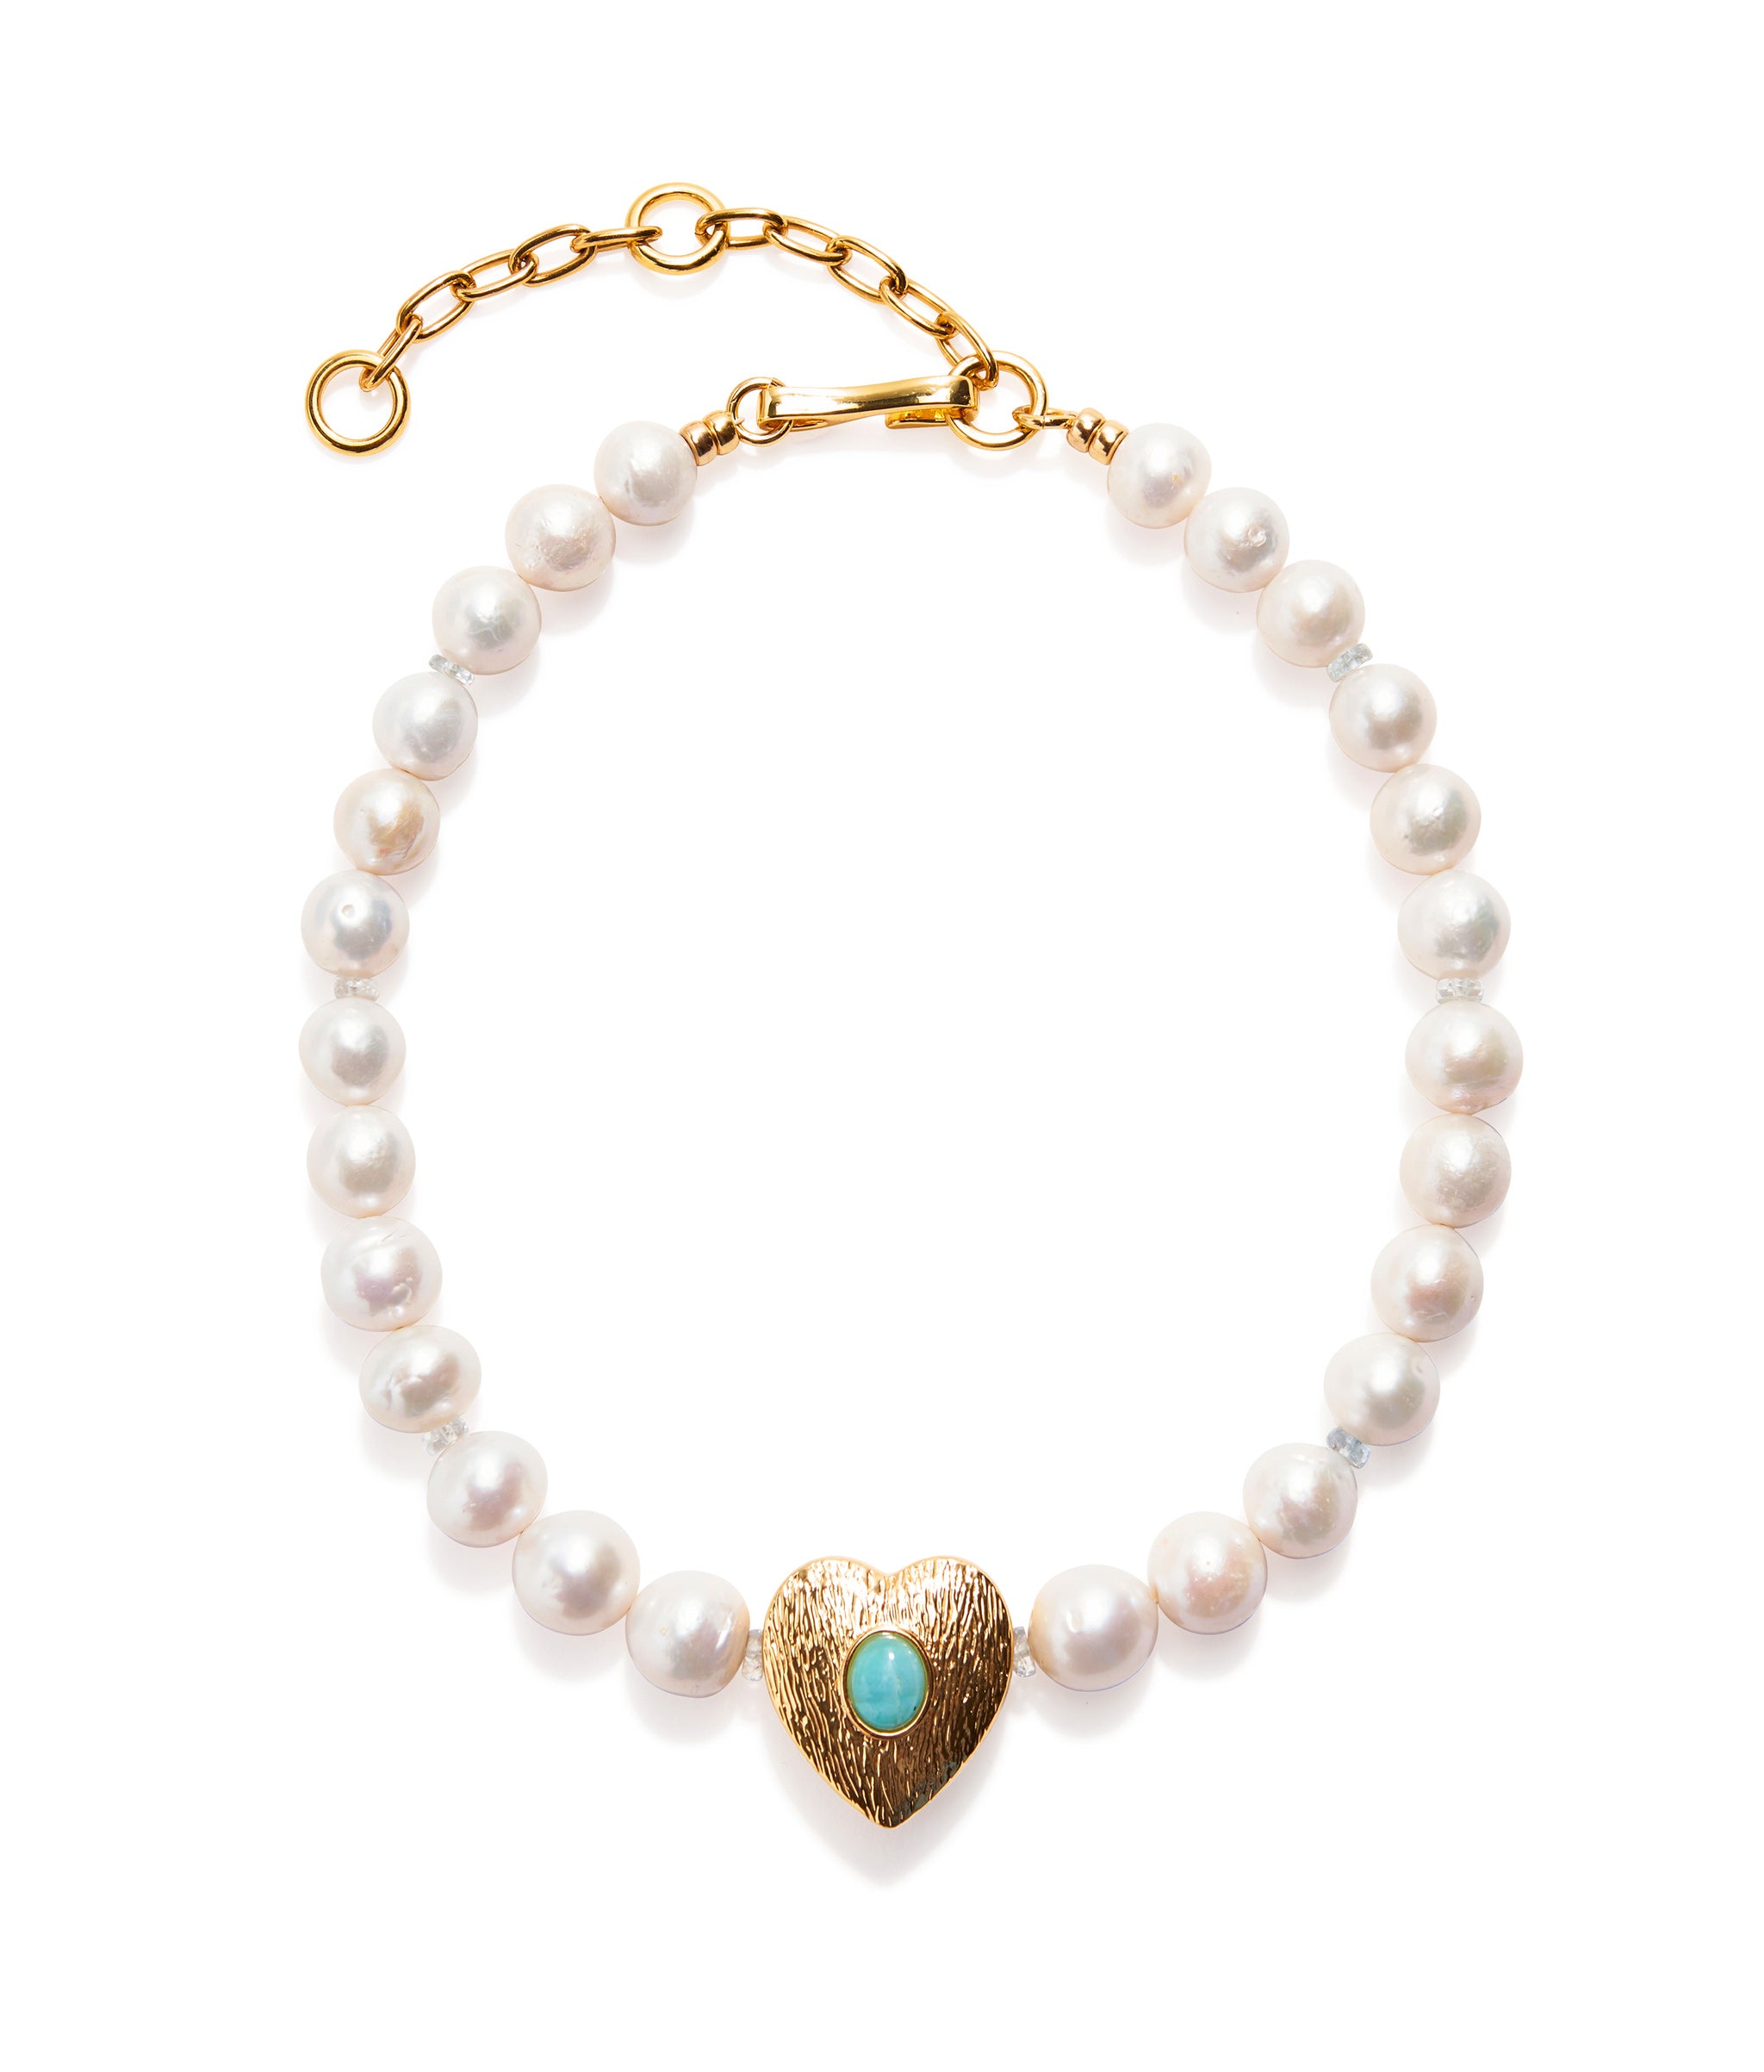 Gemini Collar in Pearl. Gold-plated brass with freshwater pearls, aquamarine, and a gold heart pendant with amazonite.